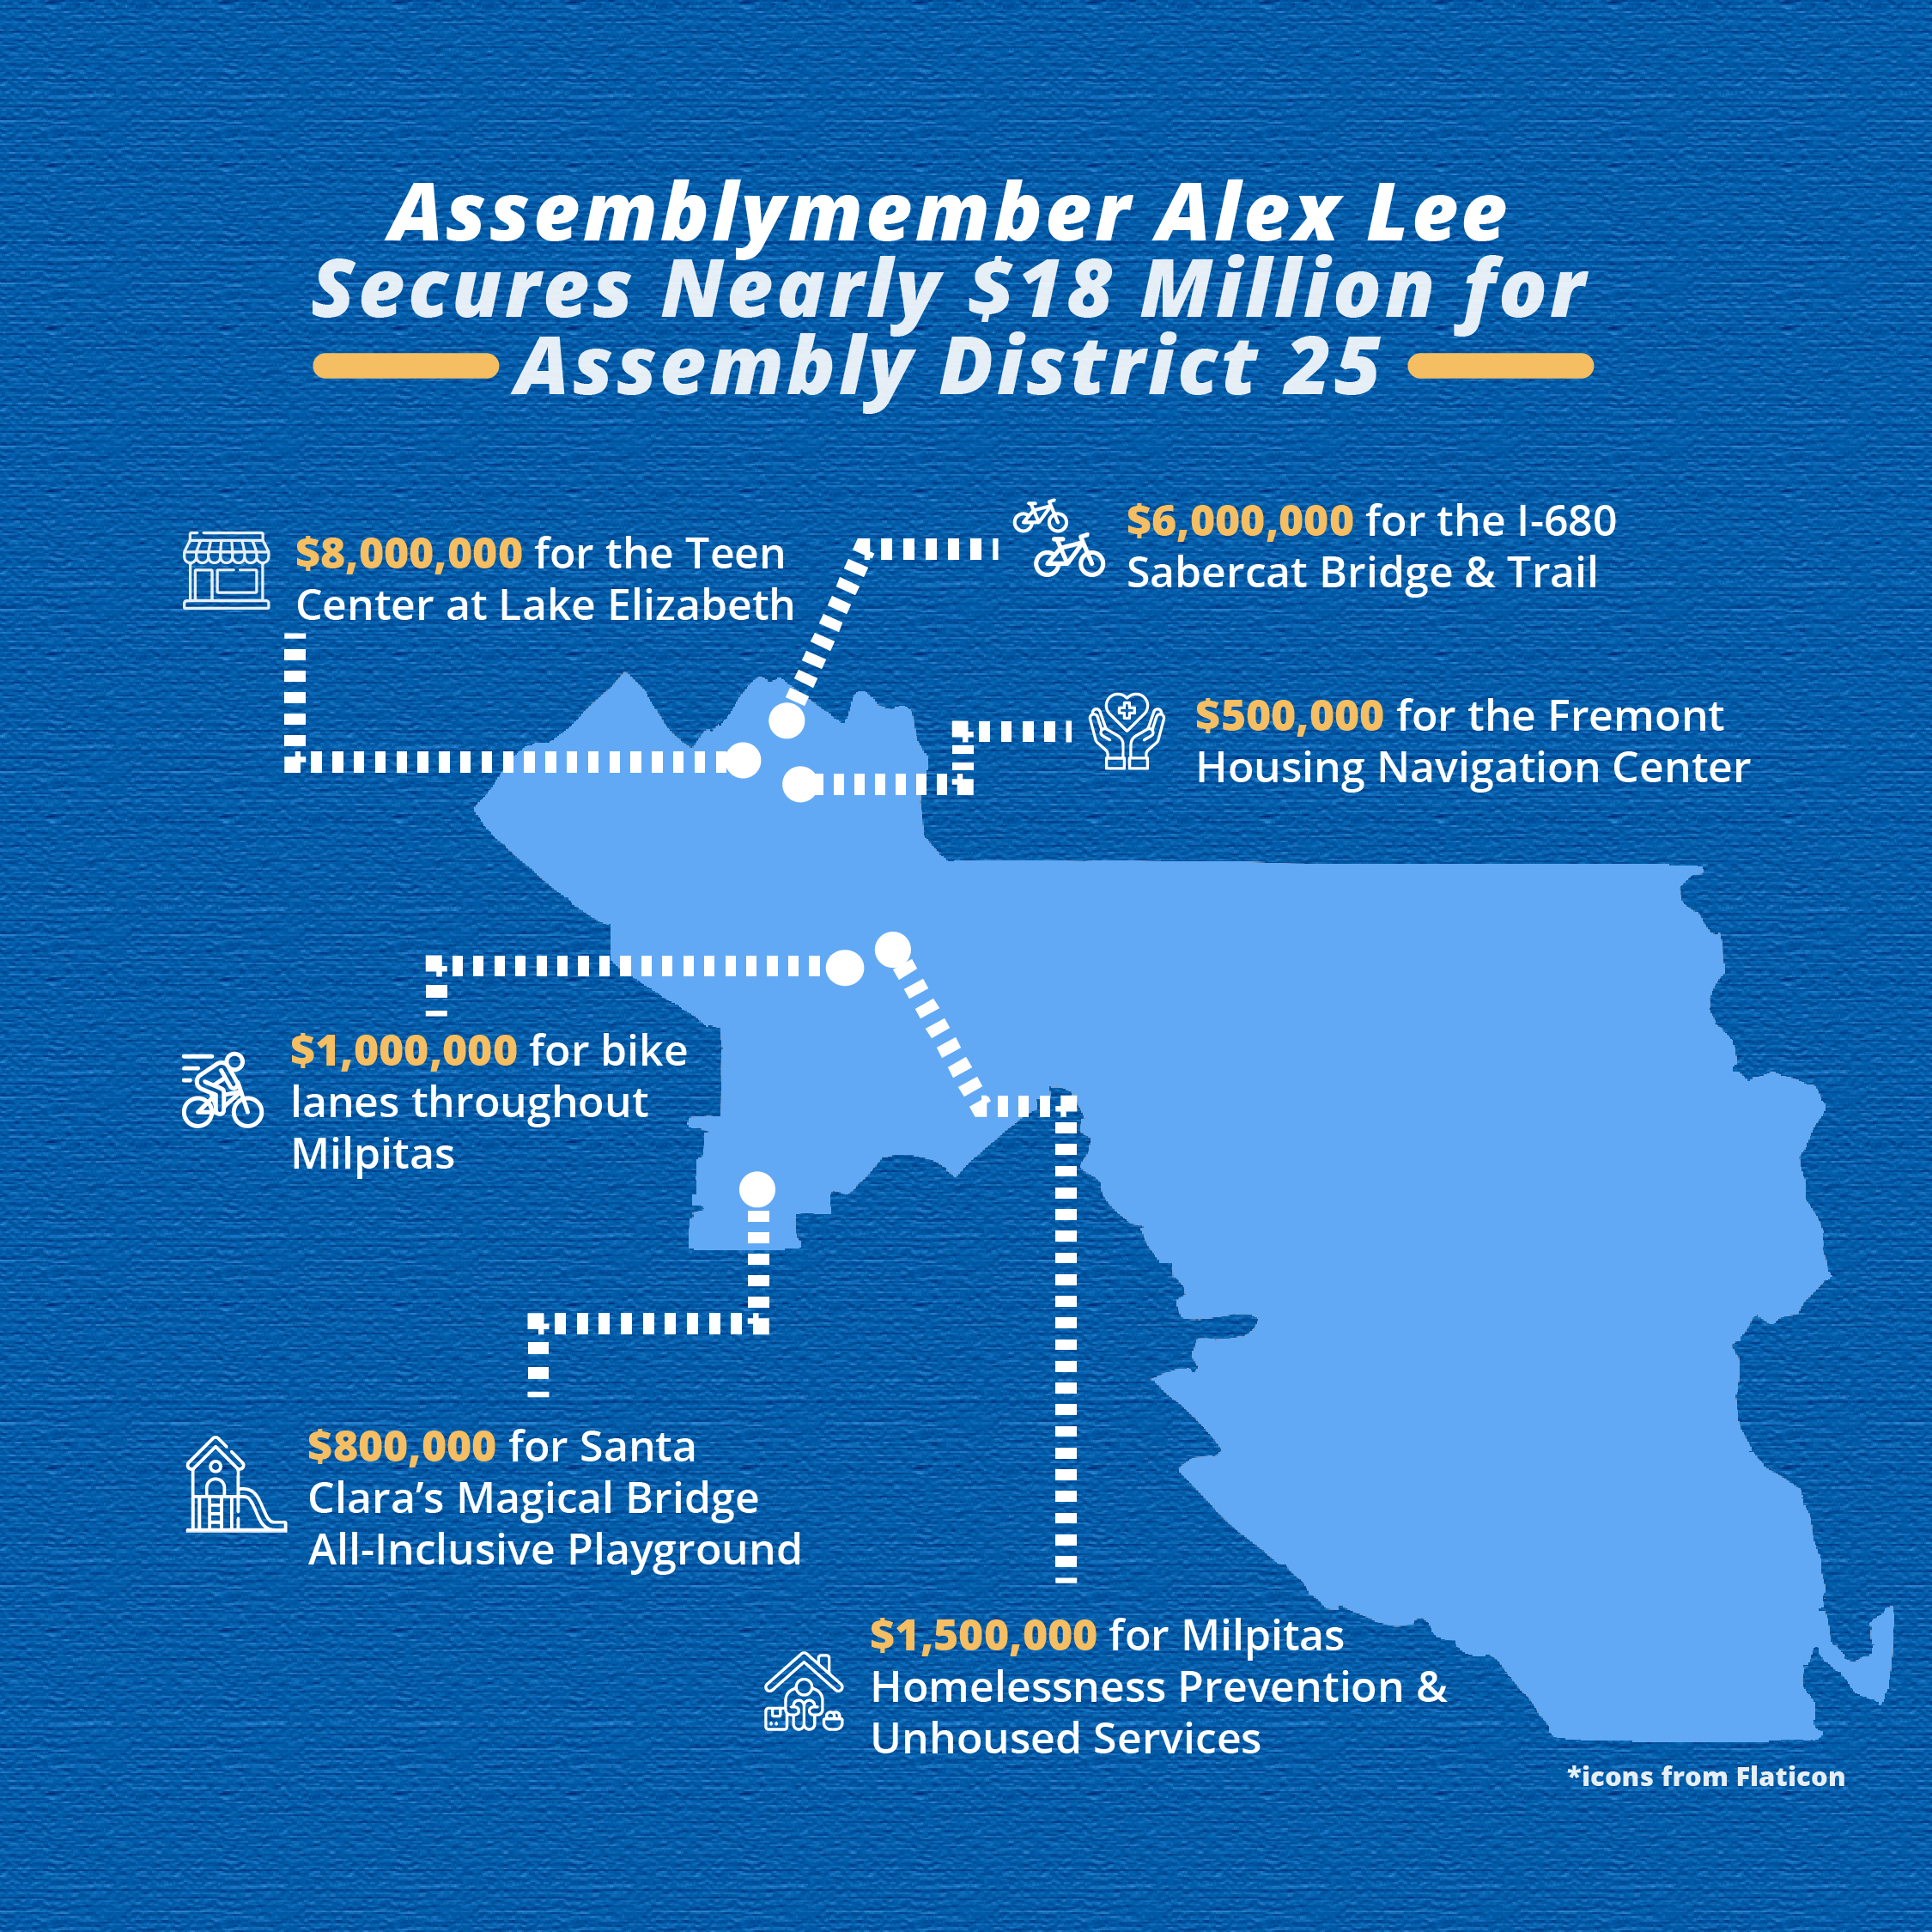 Assemblymember Alex Lee Secures Nearly $18 Million for Assembly District 25  - $8 million for the Teen Center at Lake Elizabeth, $6 million for the I-680 Sabercat Bridge & Trail, $1.5 Million for Unhoused Services in Milpitas, $1 Million for Bike Lanes throughout Milpitas, $500,000 for the Homeless Navigation Center, and $800,000 for Santa Clara's Magical Bridge All-Inclusive Playground 